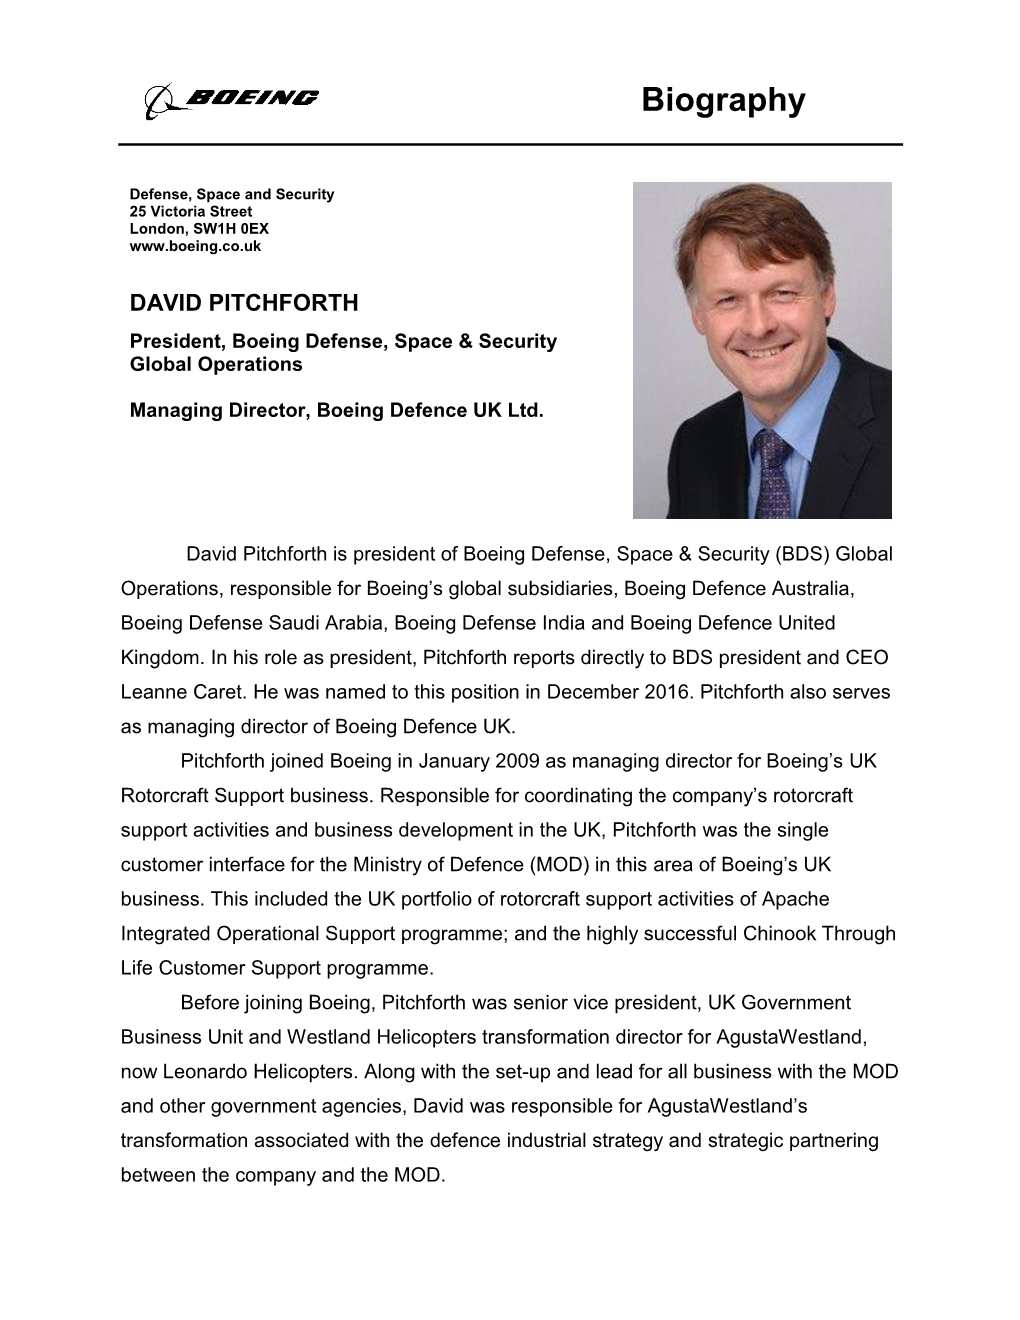 DAVID PITCHFORTH President, Boeing Defense, Space & Security Global Operations